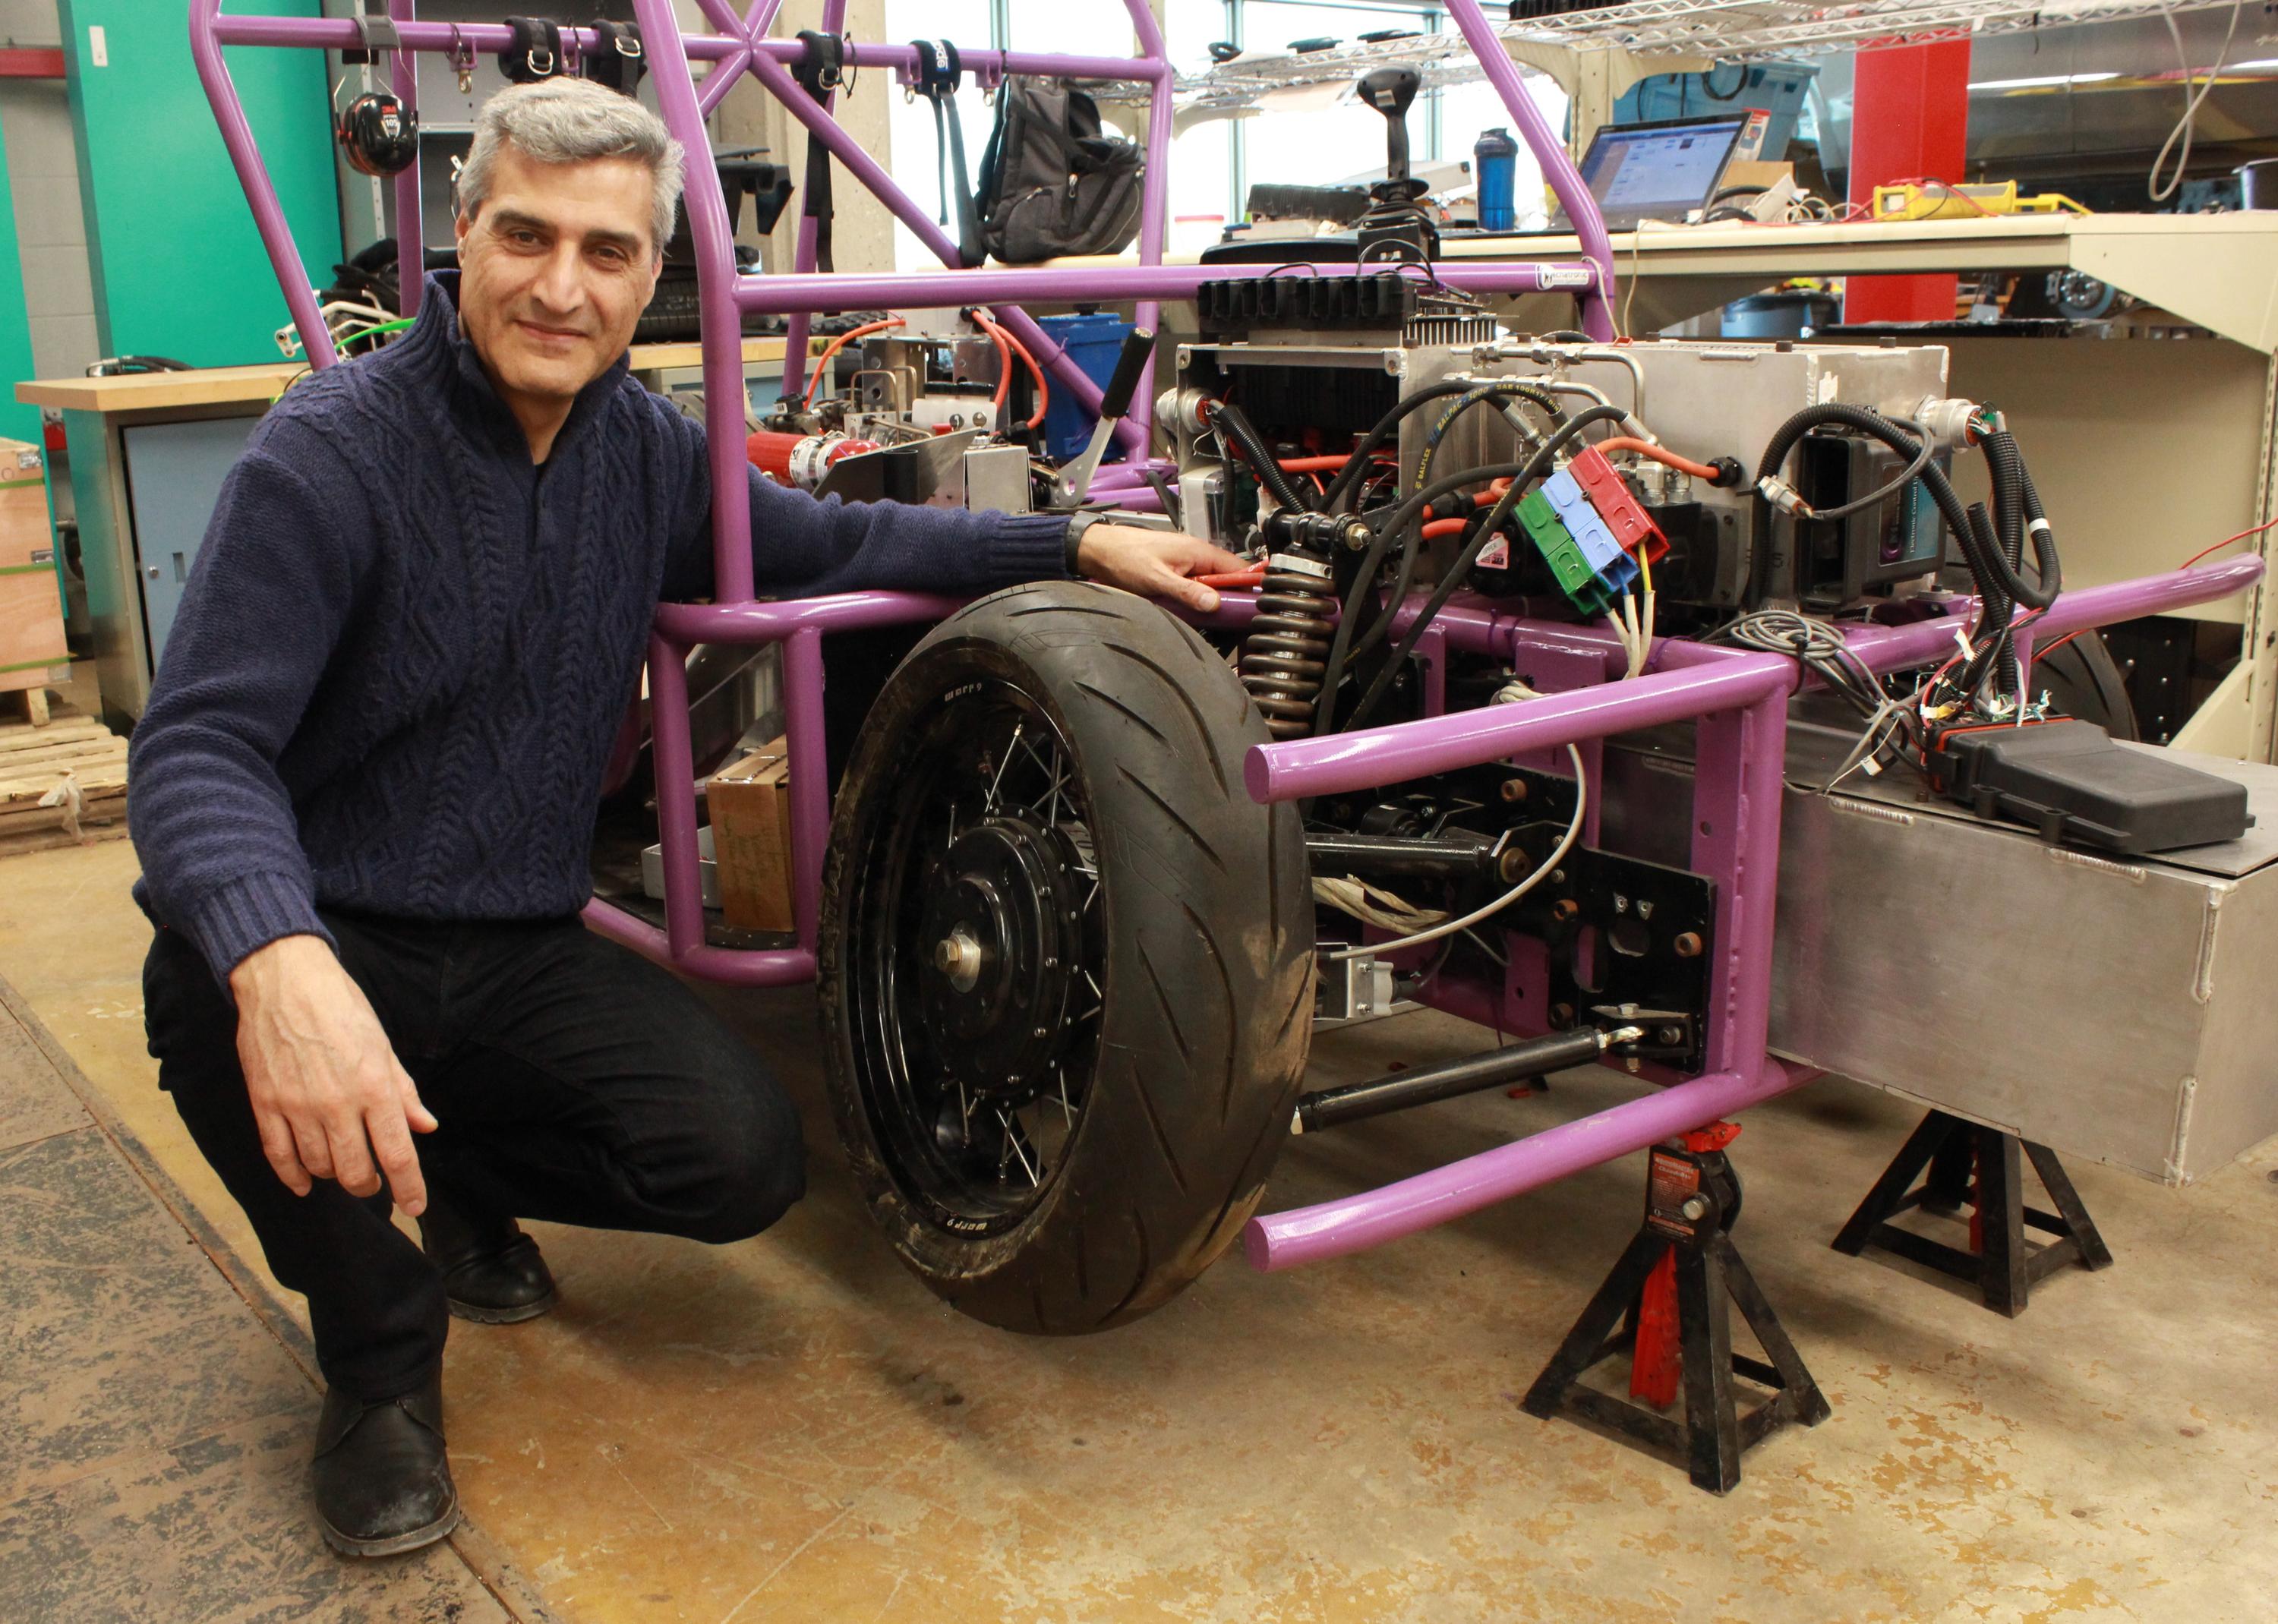 Amir Khajepour poses with a protype three-wheeled vehicle that uses new wheel units developed by Waterloo Engineering researchers.